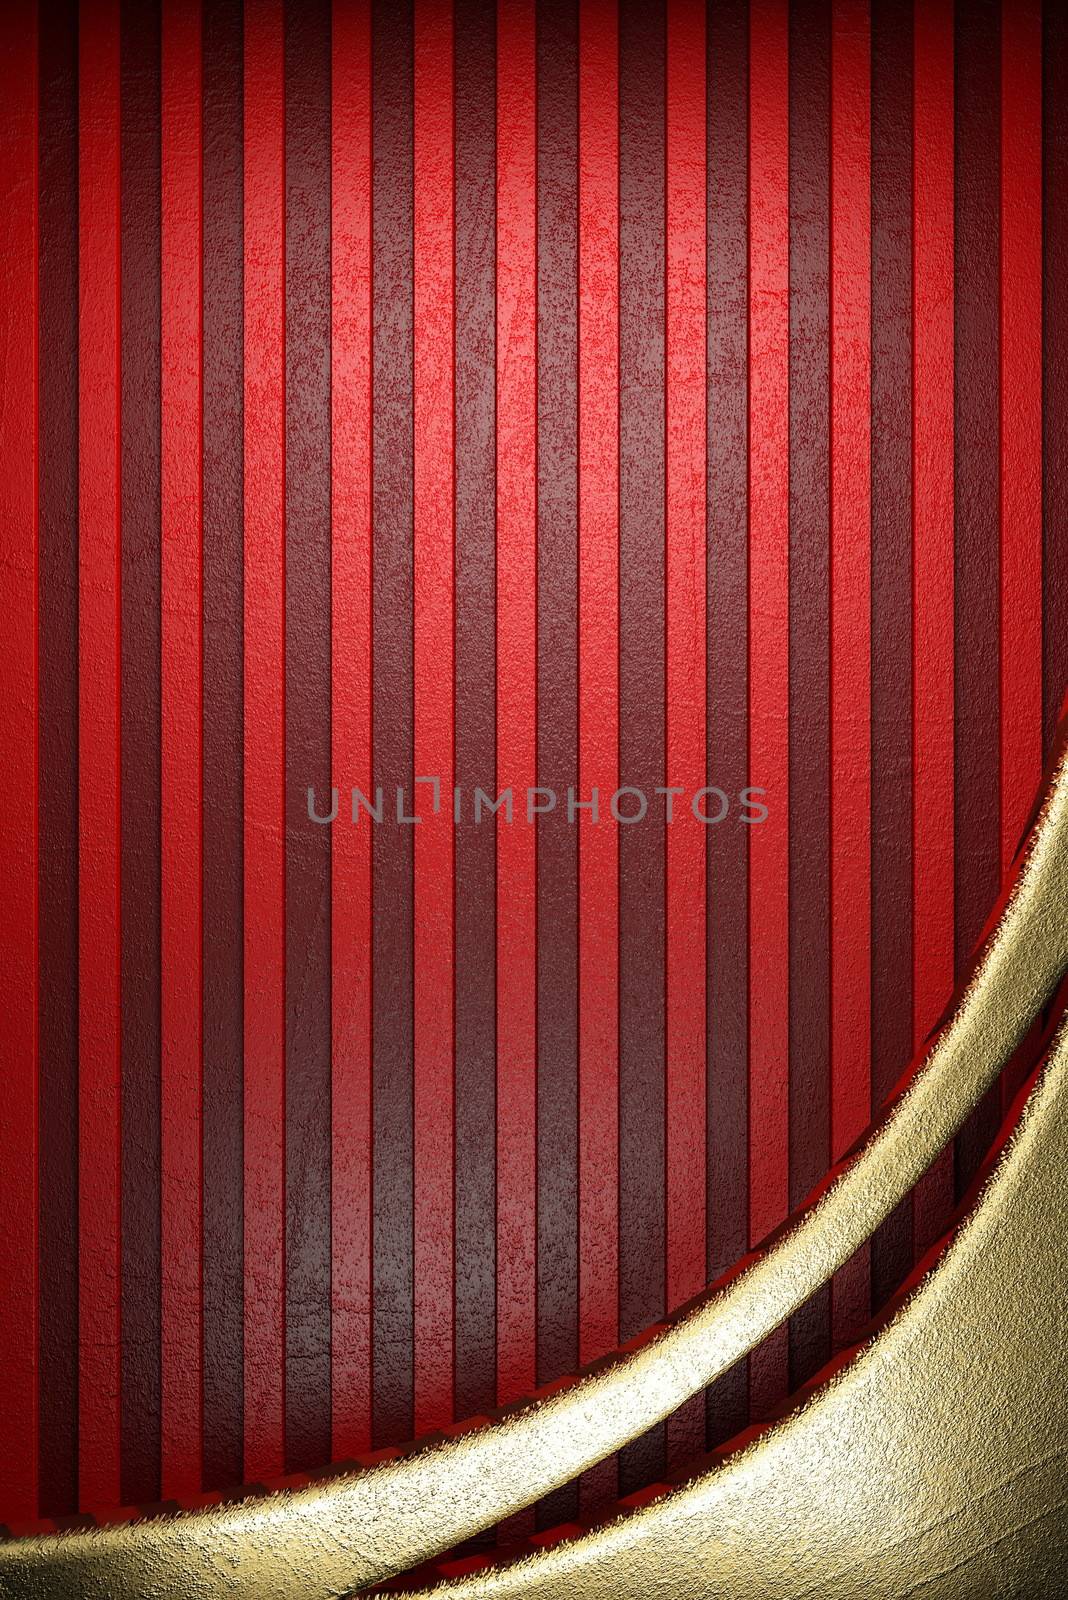 gold on red background by videodoctor